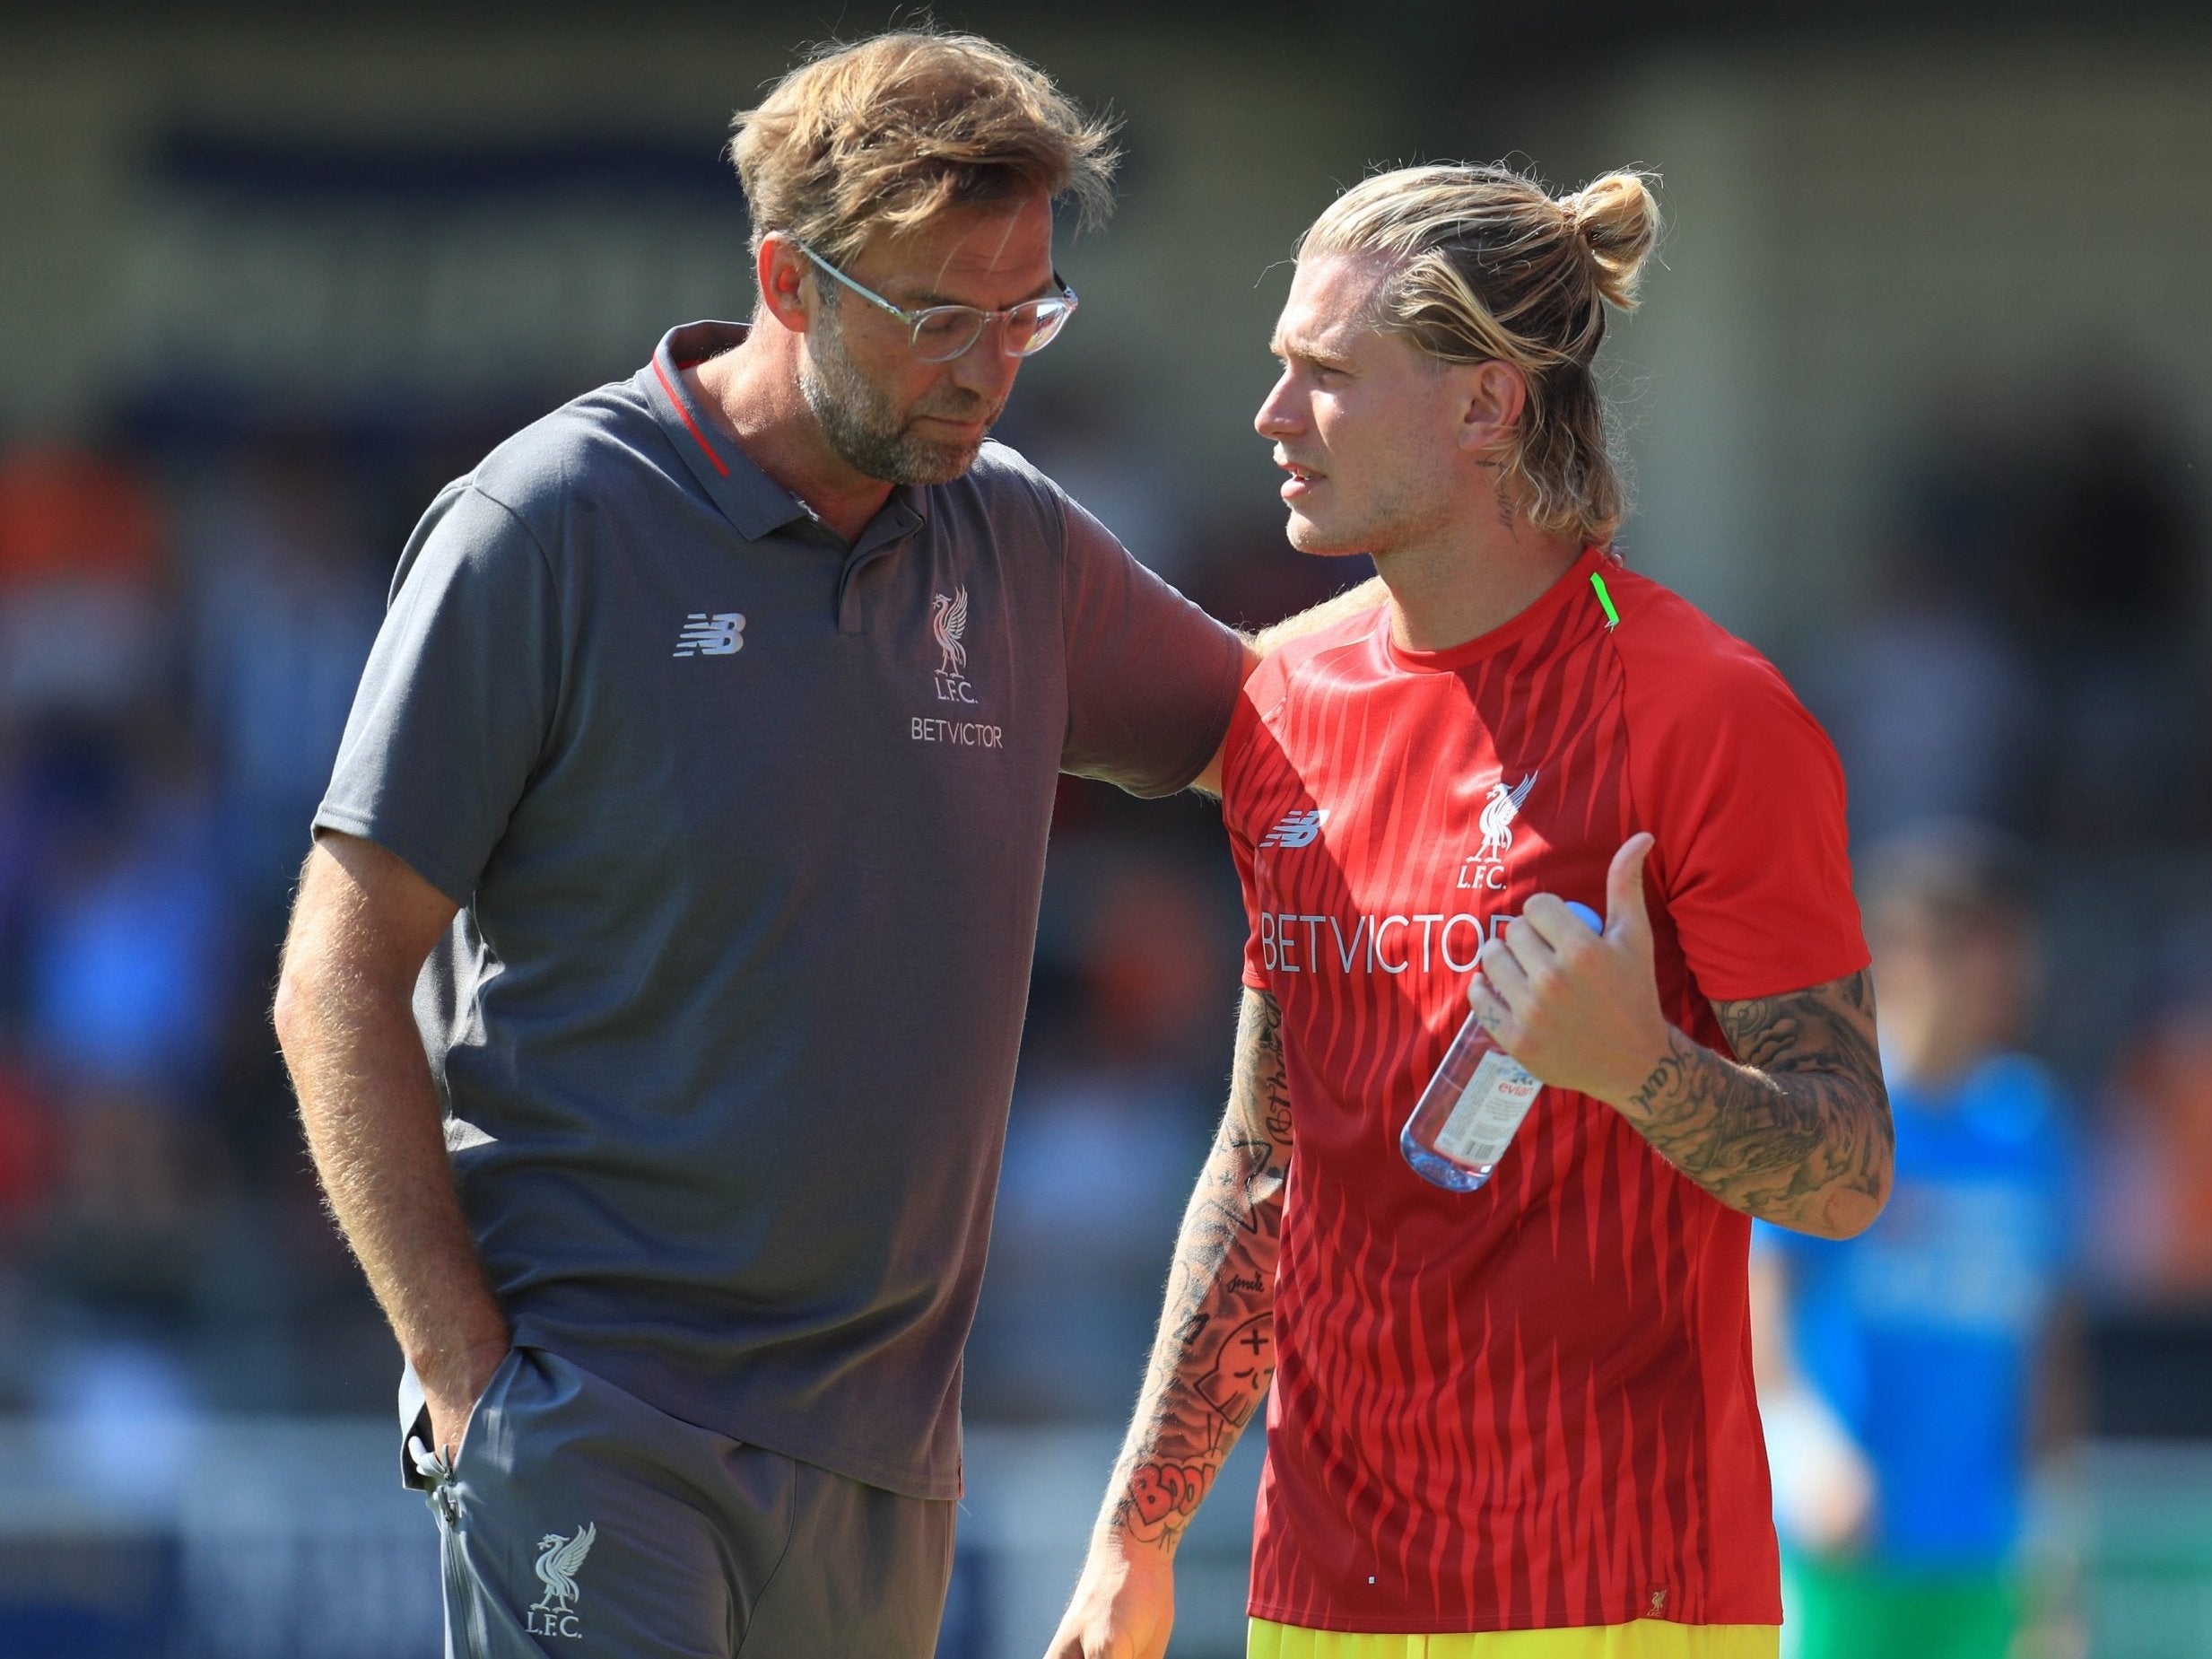 Klopp did not have the right words to say to Karius after the Champions League final